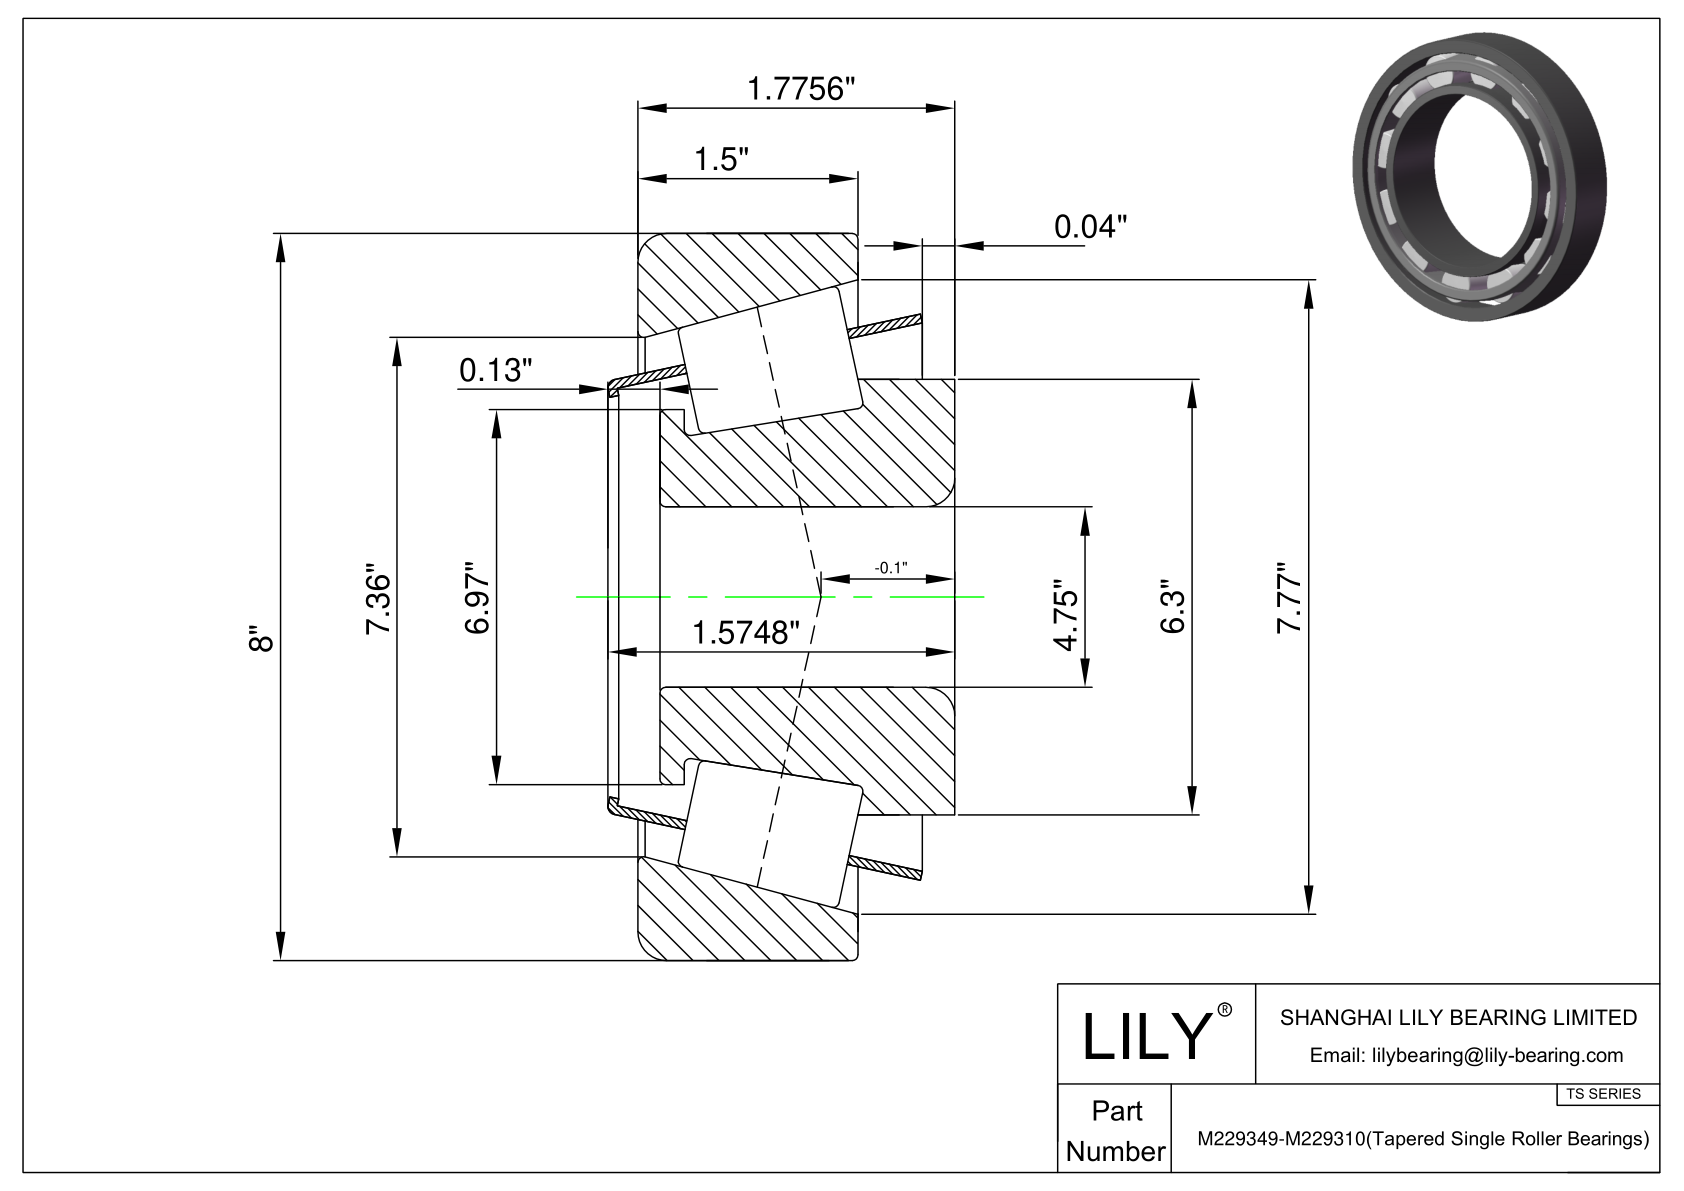 M229349-M229310 TS (Tapered Single Roller Bearings) (Imperial) cad drawing